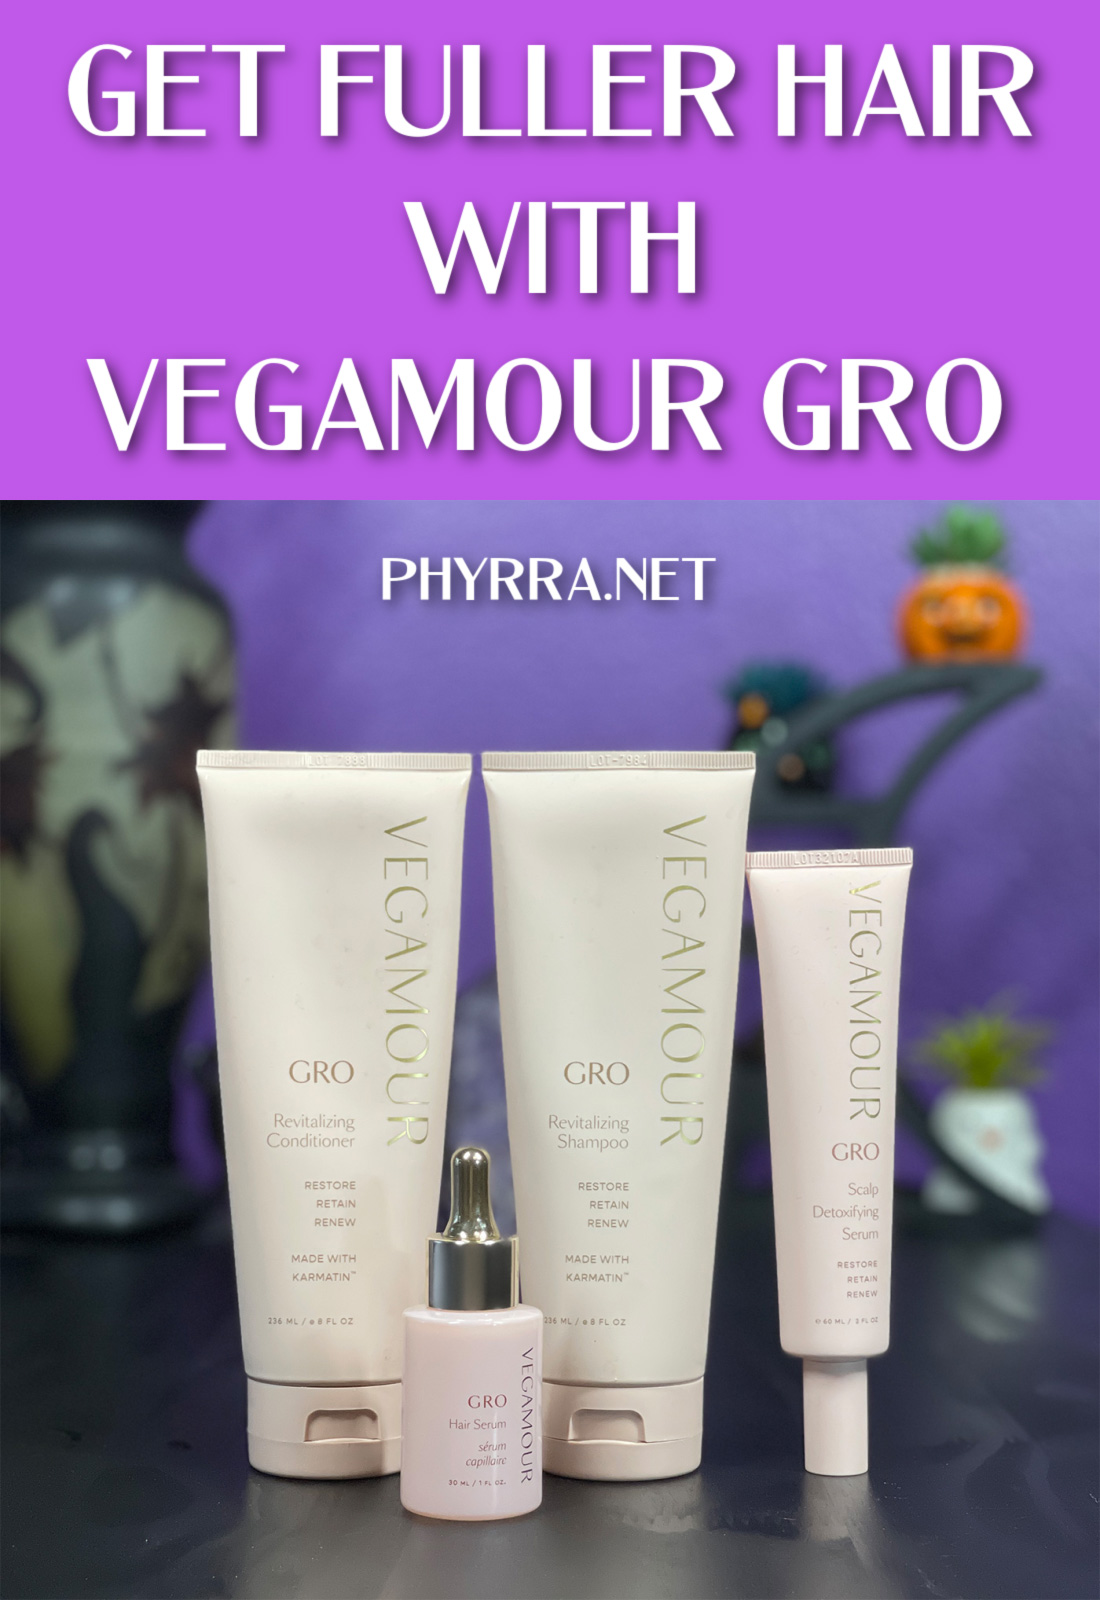 Vegamour GRO Hair Products Review